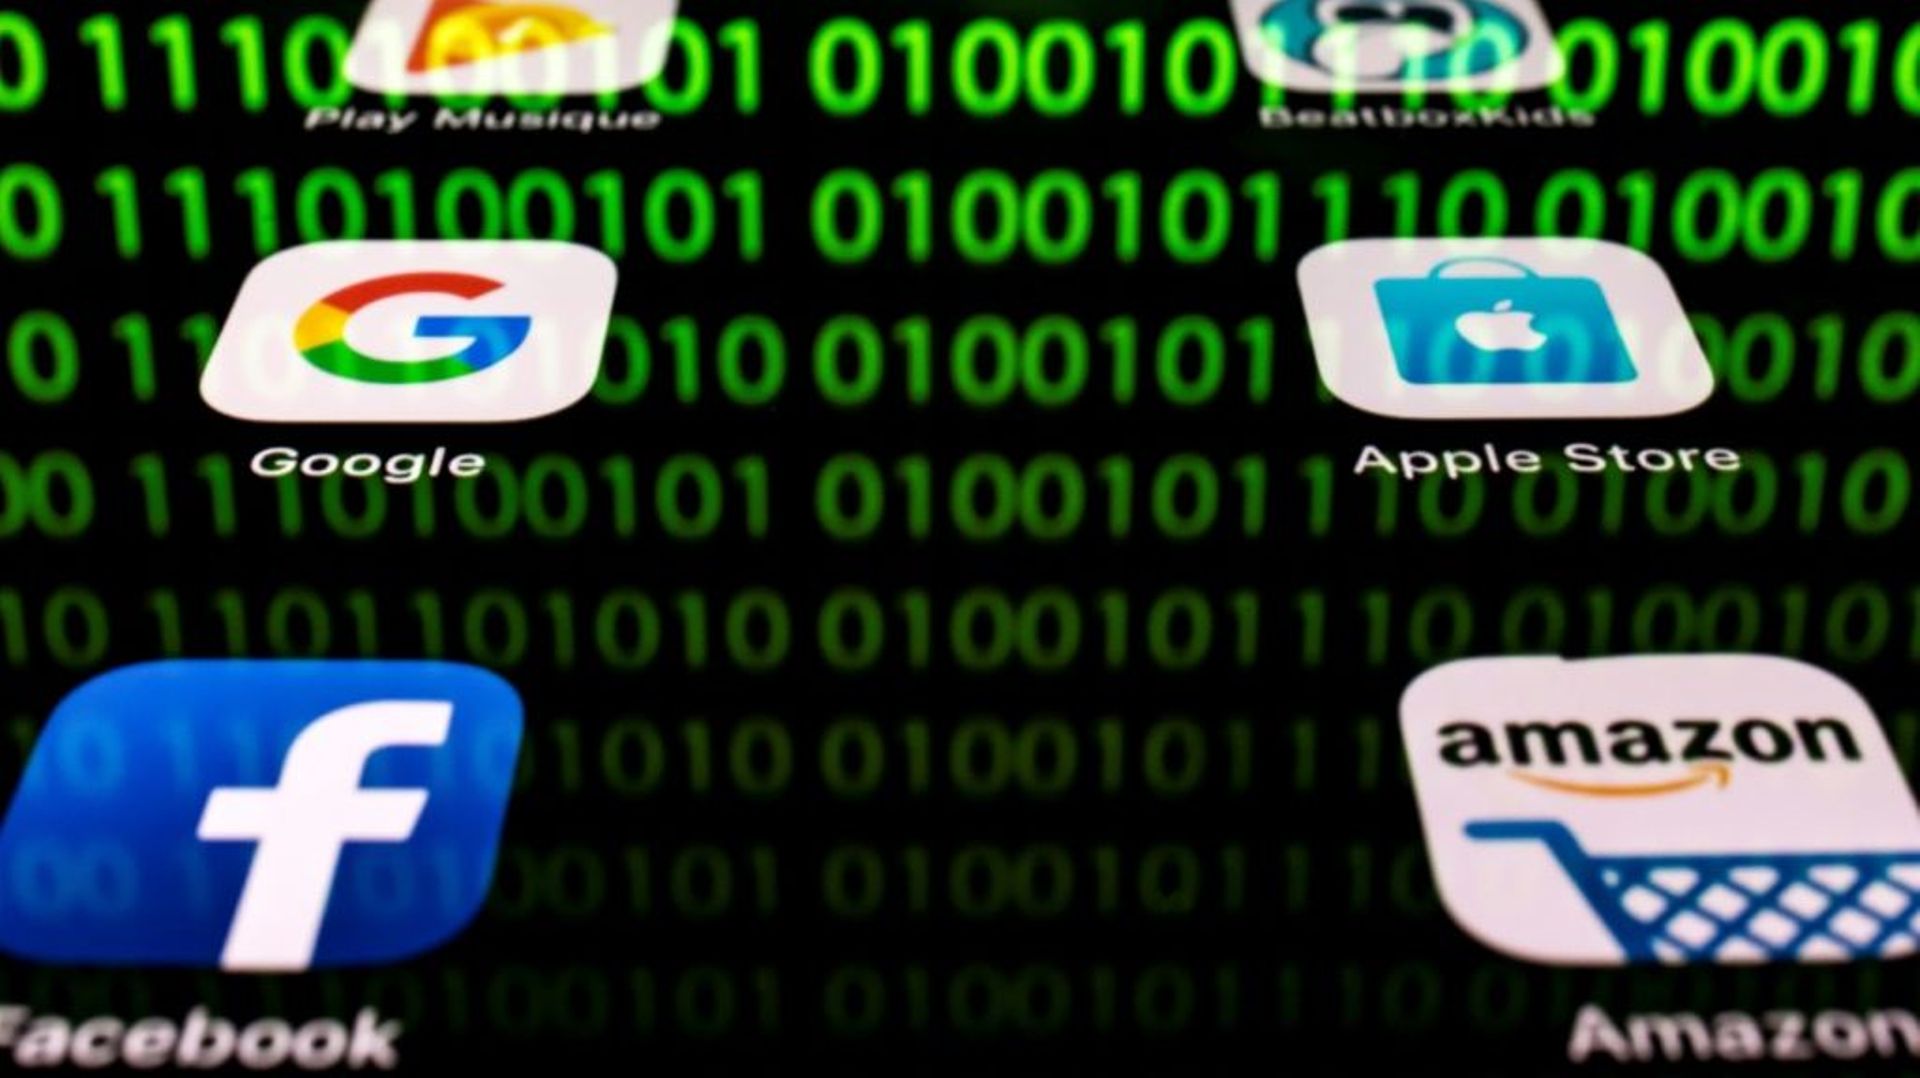 The European Union is currently negotiating landmark laws that once agreed could set a new standard worldwide on how US tech giants can operate